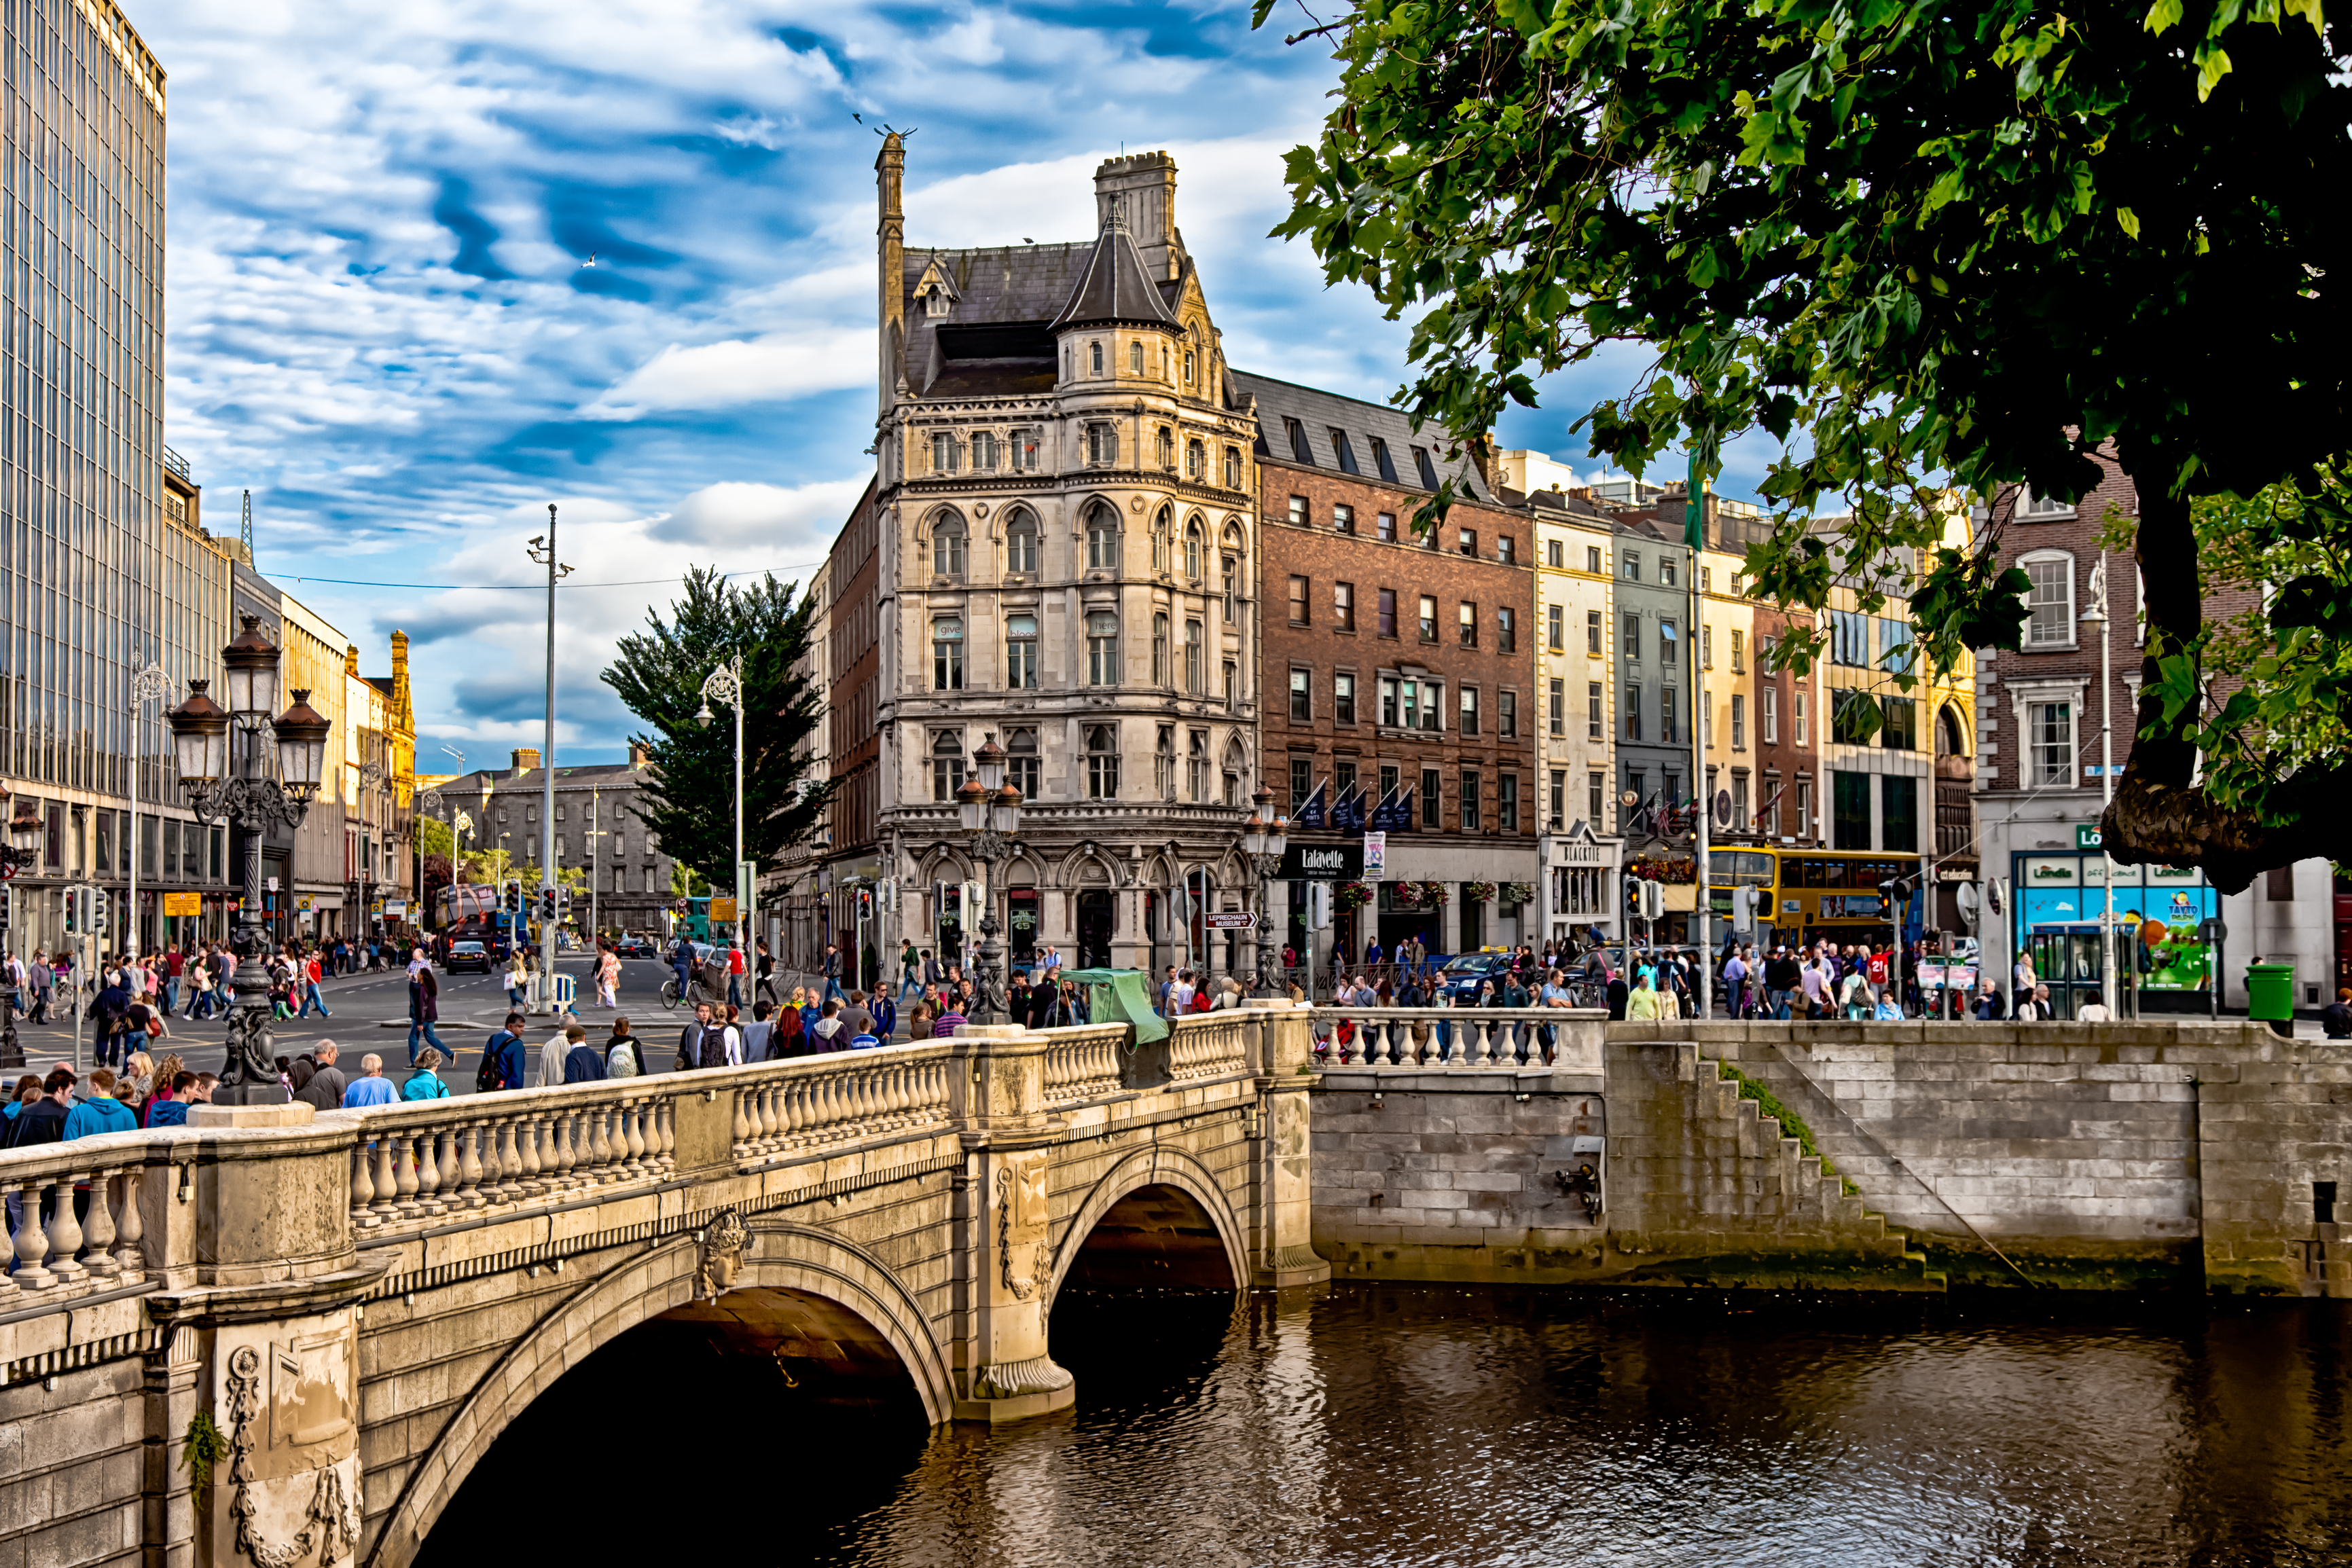 6-night London & Dublin escape with flights from $1,167